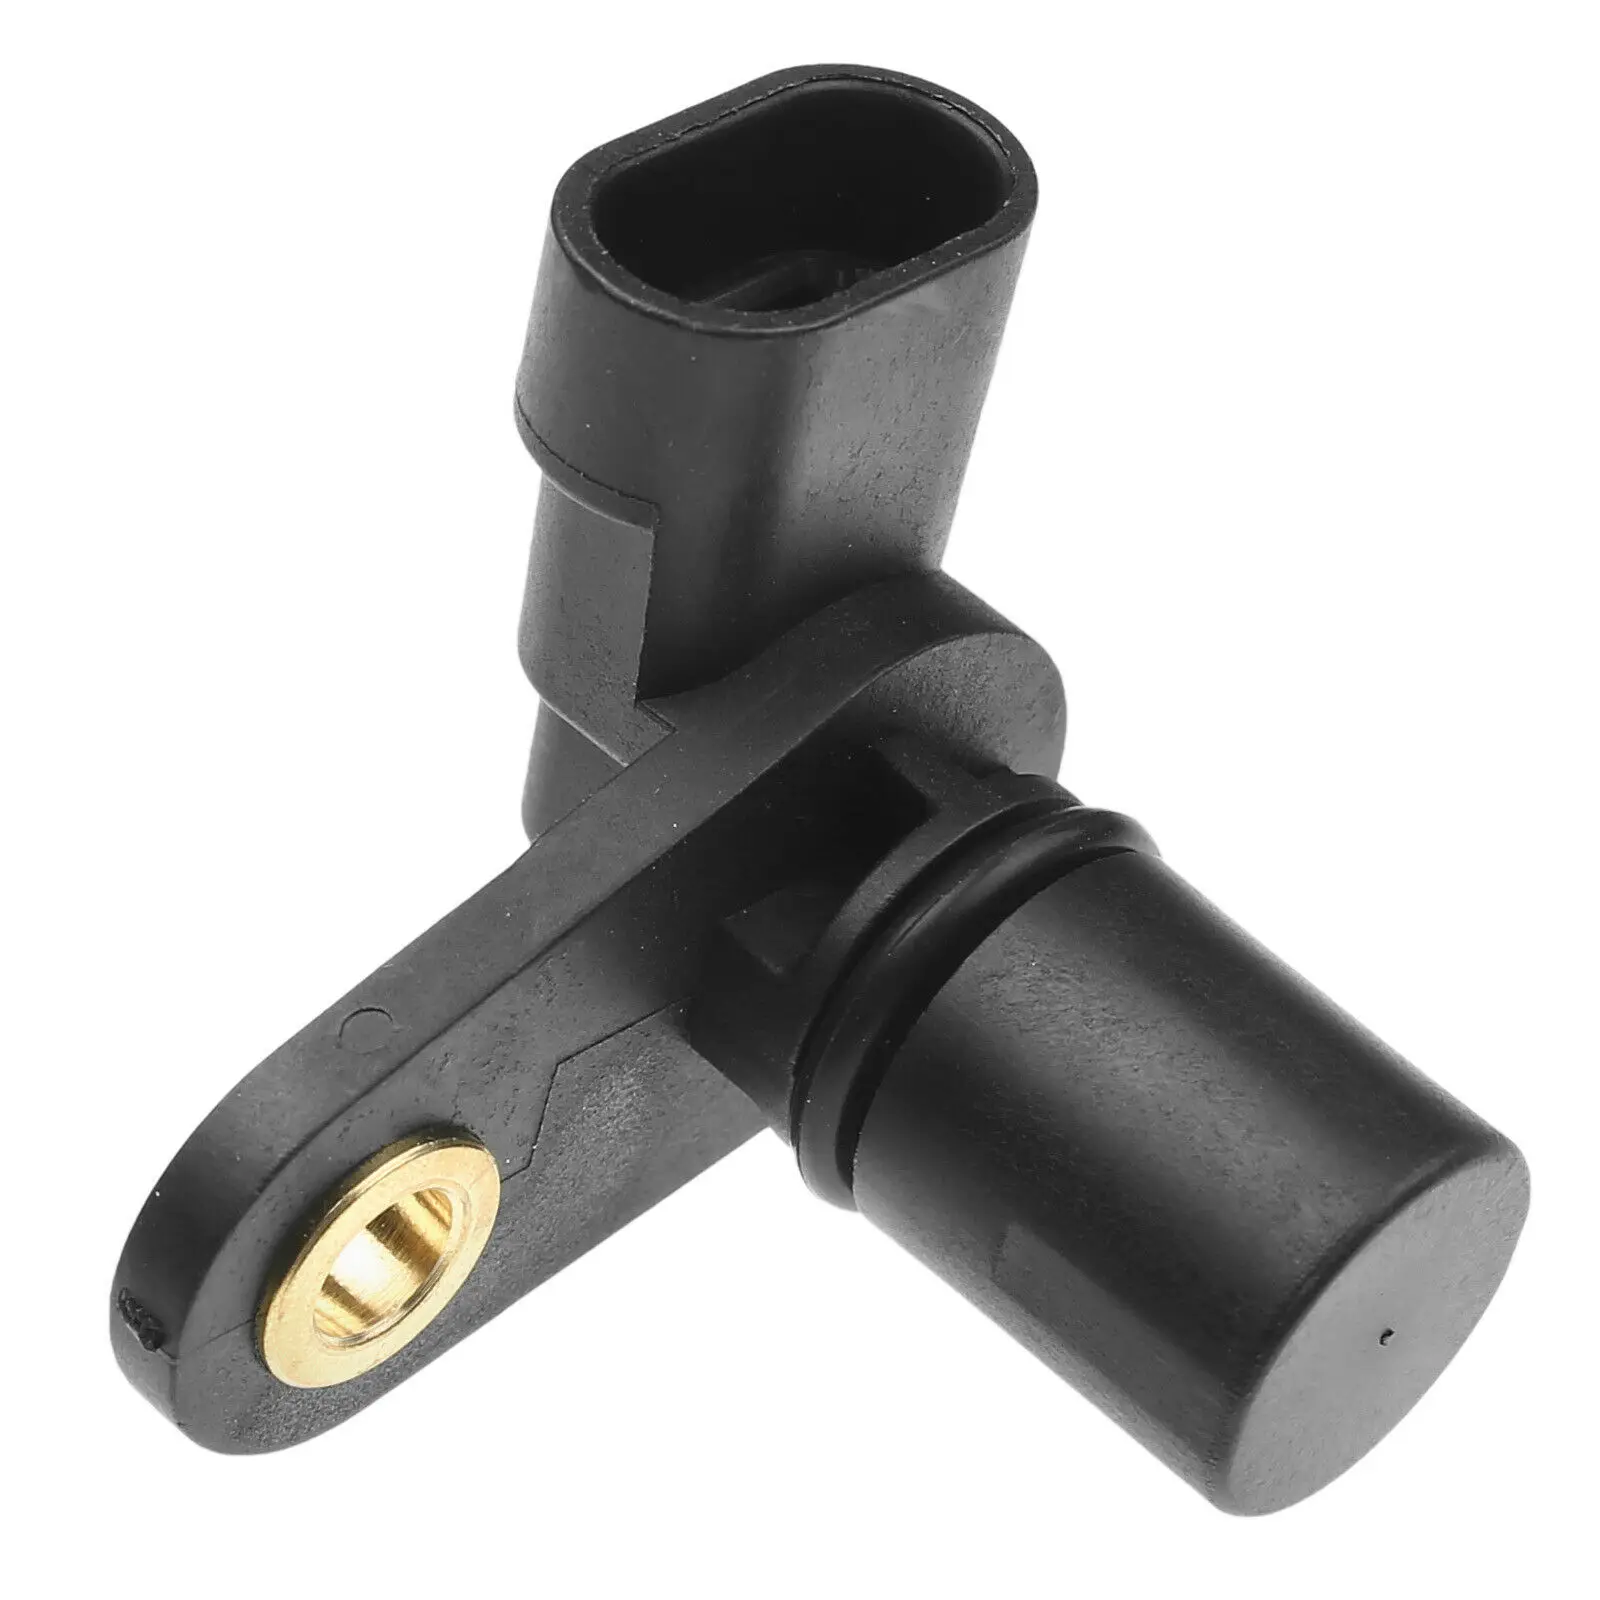 1pc 12597253 New Camshaft Position Sensor For 2008-2012 Chevrolet- Colorado- Trailblazer- 2 x camshaft position sensor pigtail connector for chrysler dodge eagle mitsubishi plymouth pc475 5269705ab 54482851ab m04882526